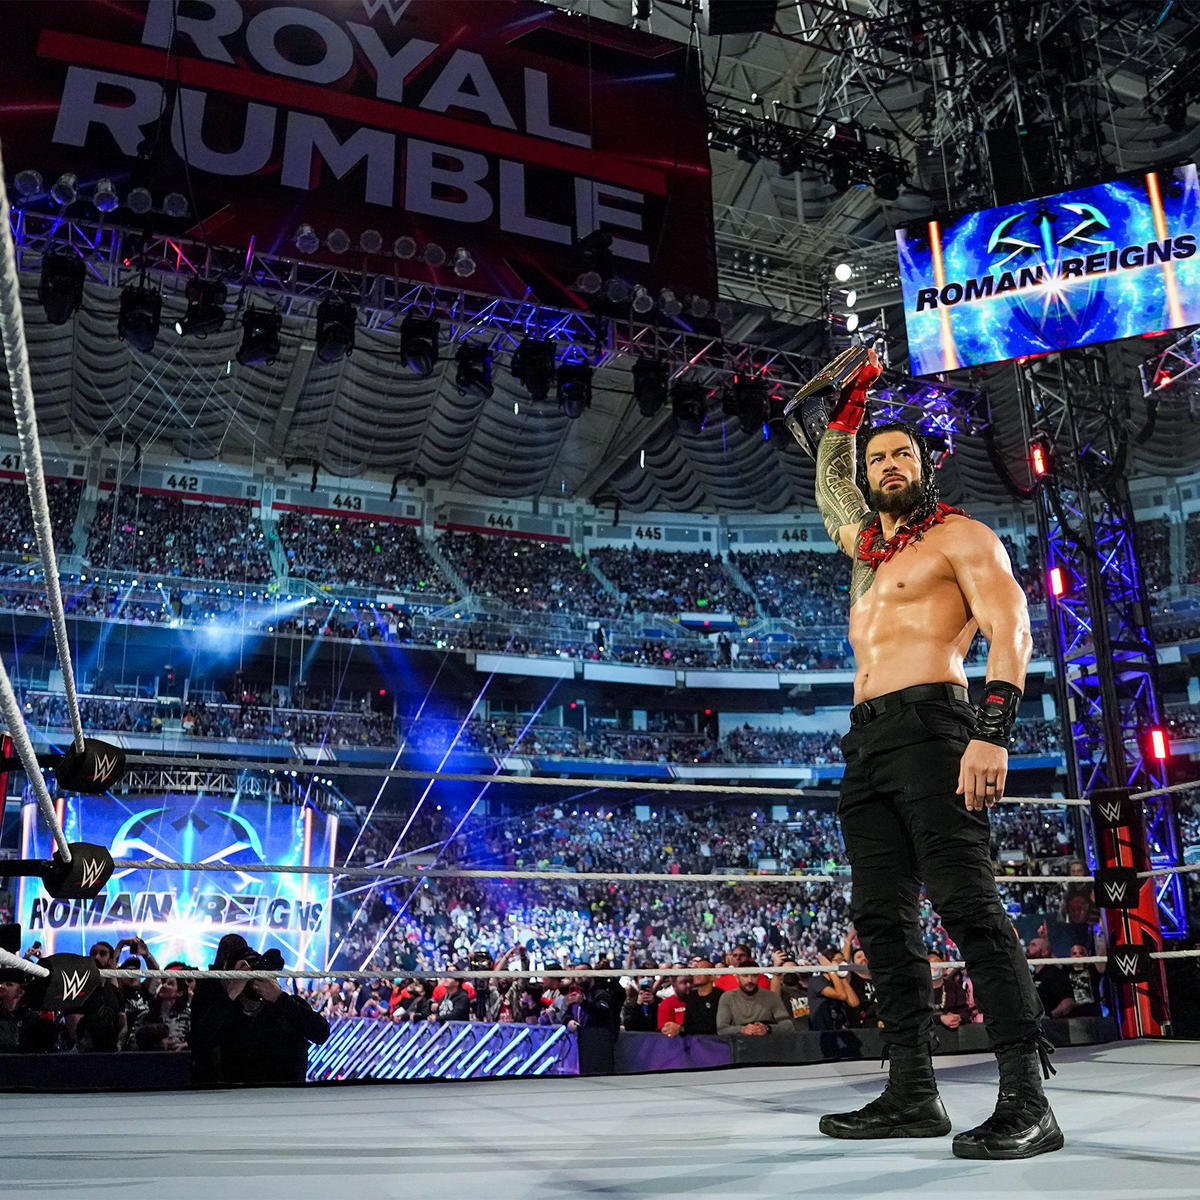 Roman Reigns Royal Rumble History Watch How the WWE Star Has Performed